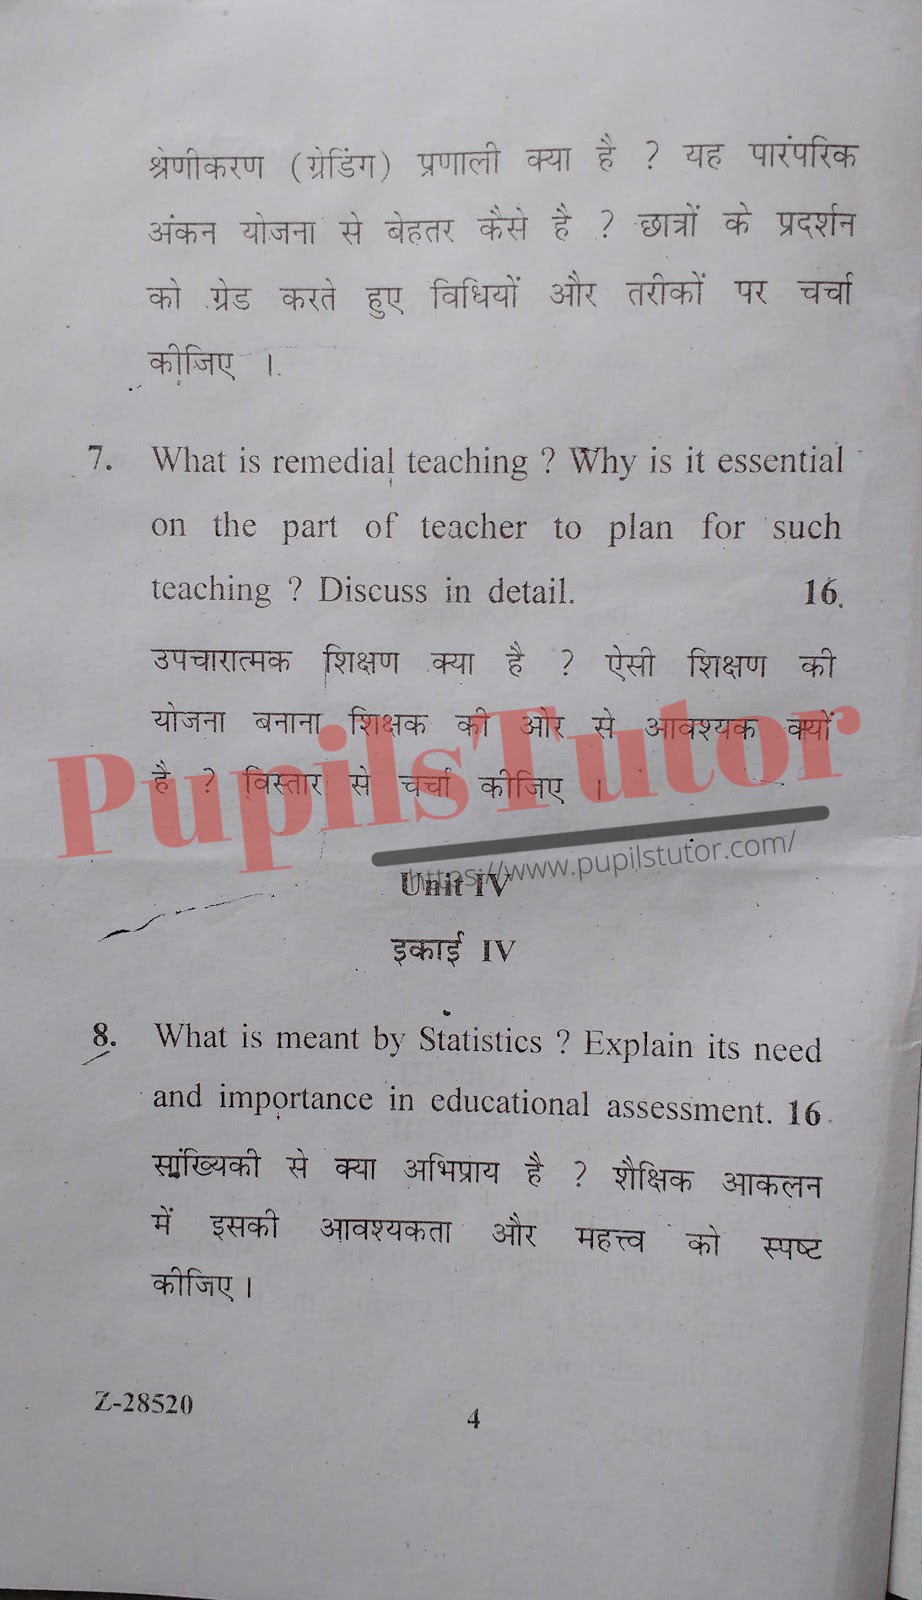 MDU (Maharshi Dayanand University, Rohtak Haryana) Regular Exam (B.Ed – Bachelor in Education) Assessment For Learning Important Questions Of June, 2019 Exam PDF Download Free (Page 4)